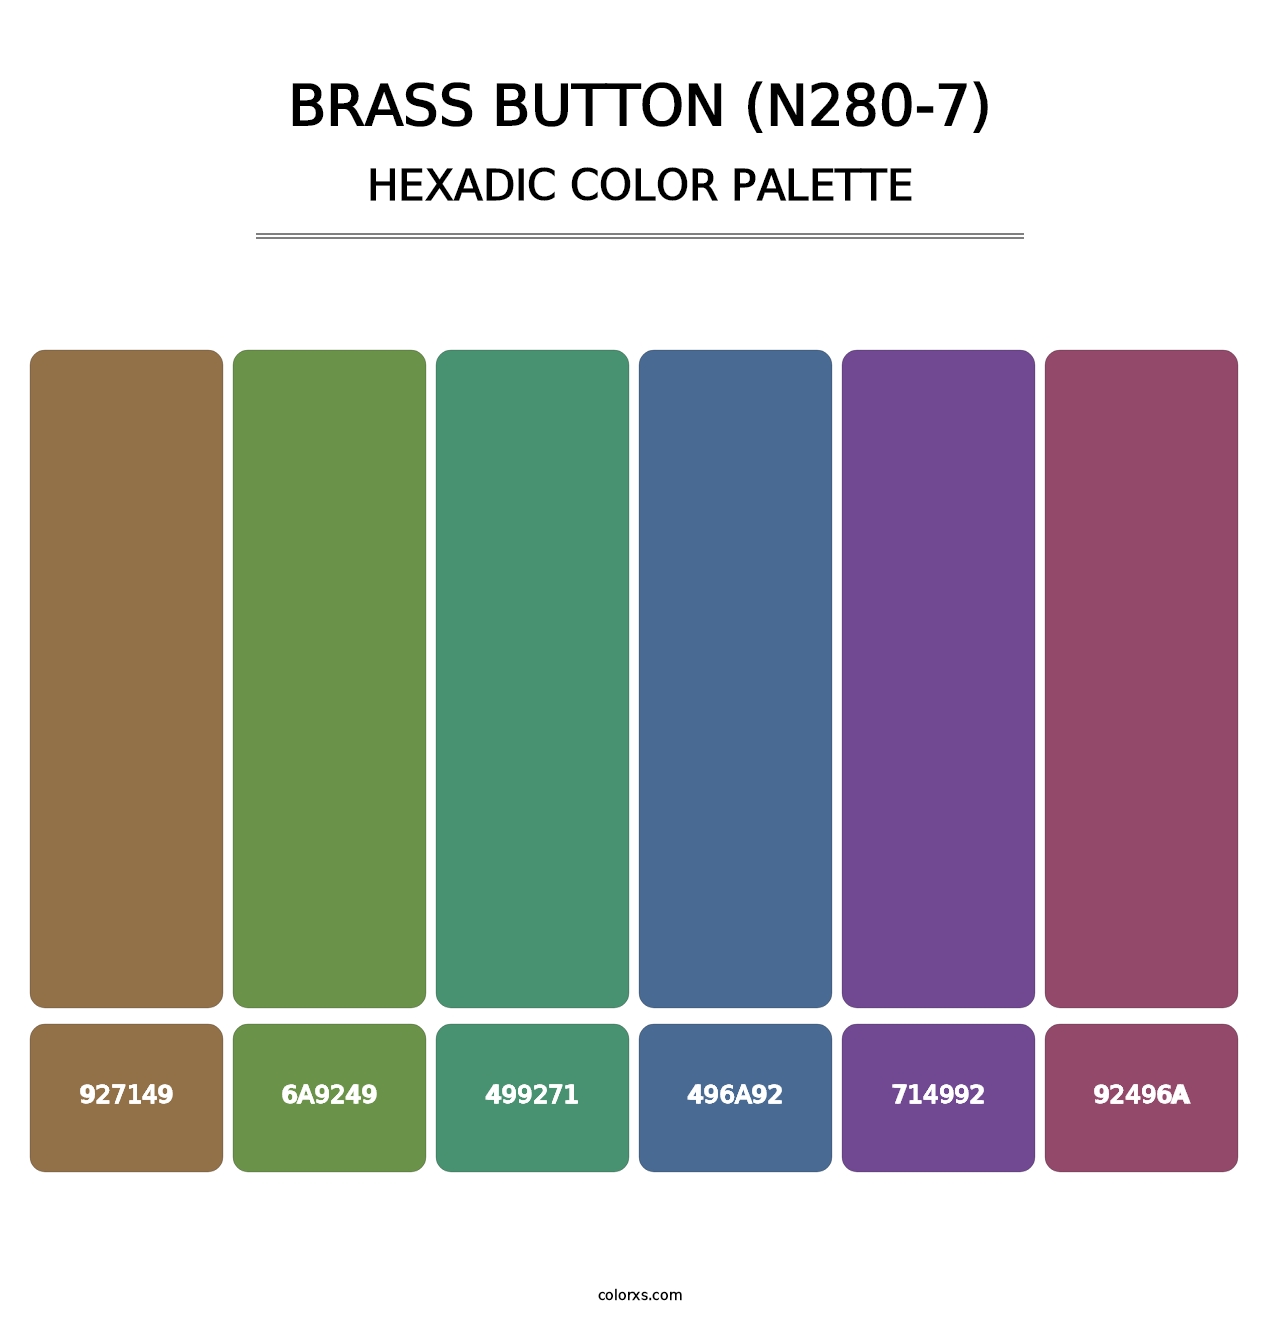 Brass Button (N280-7) - Hexadic Color Palette